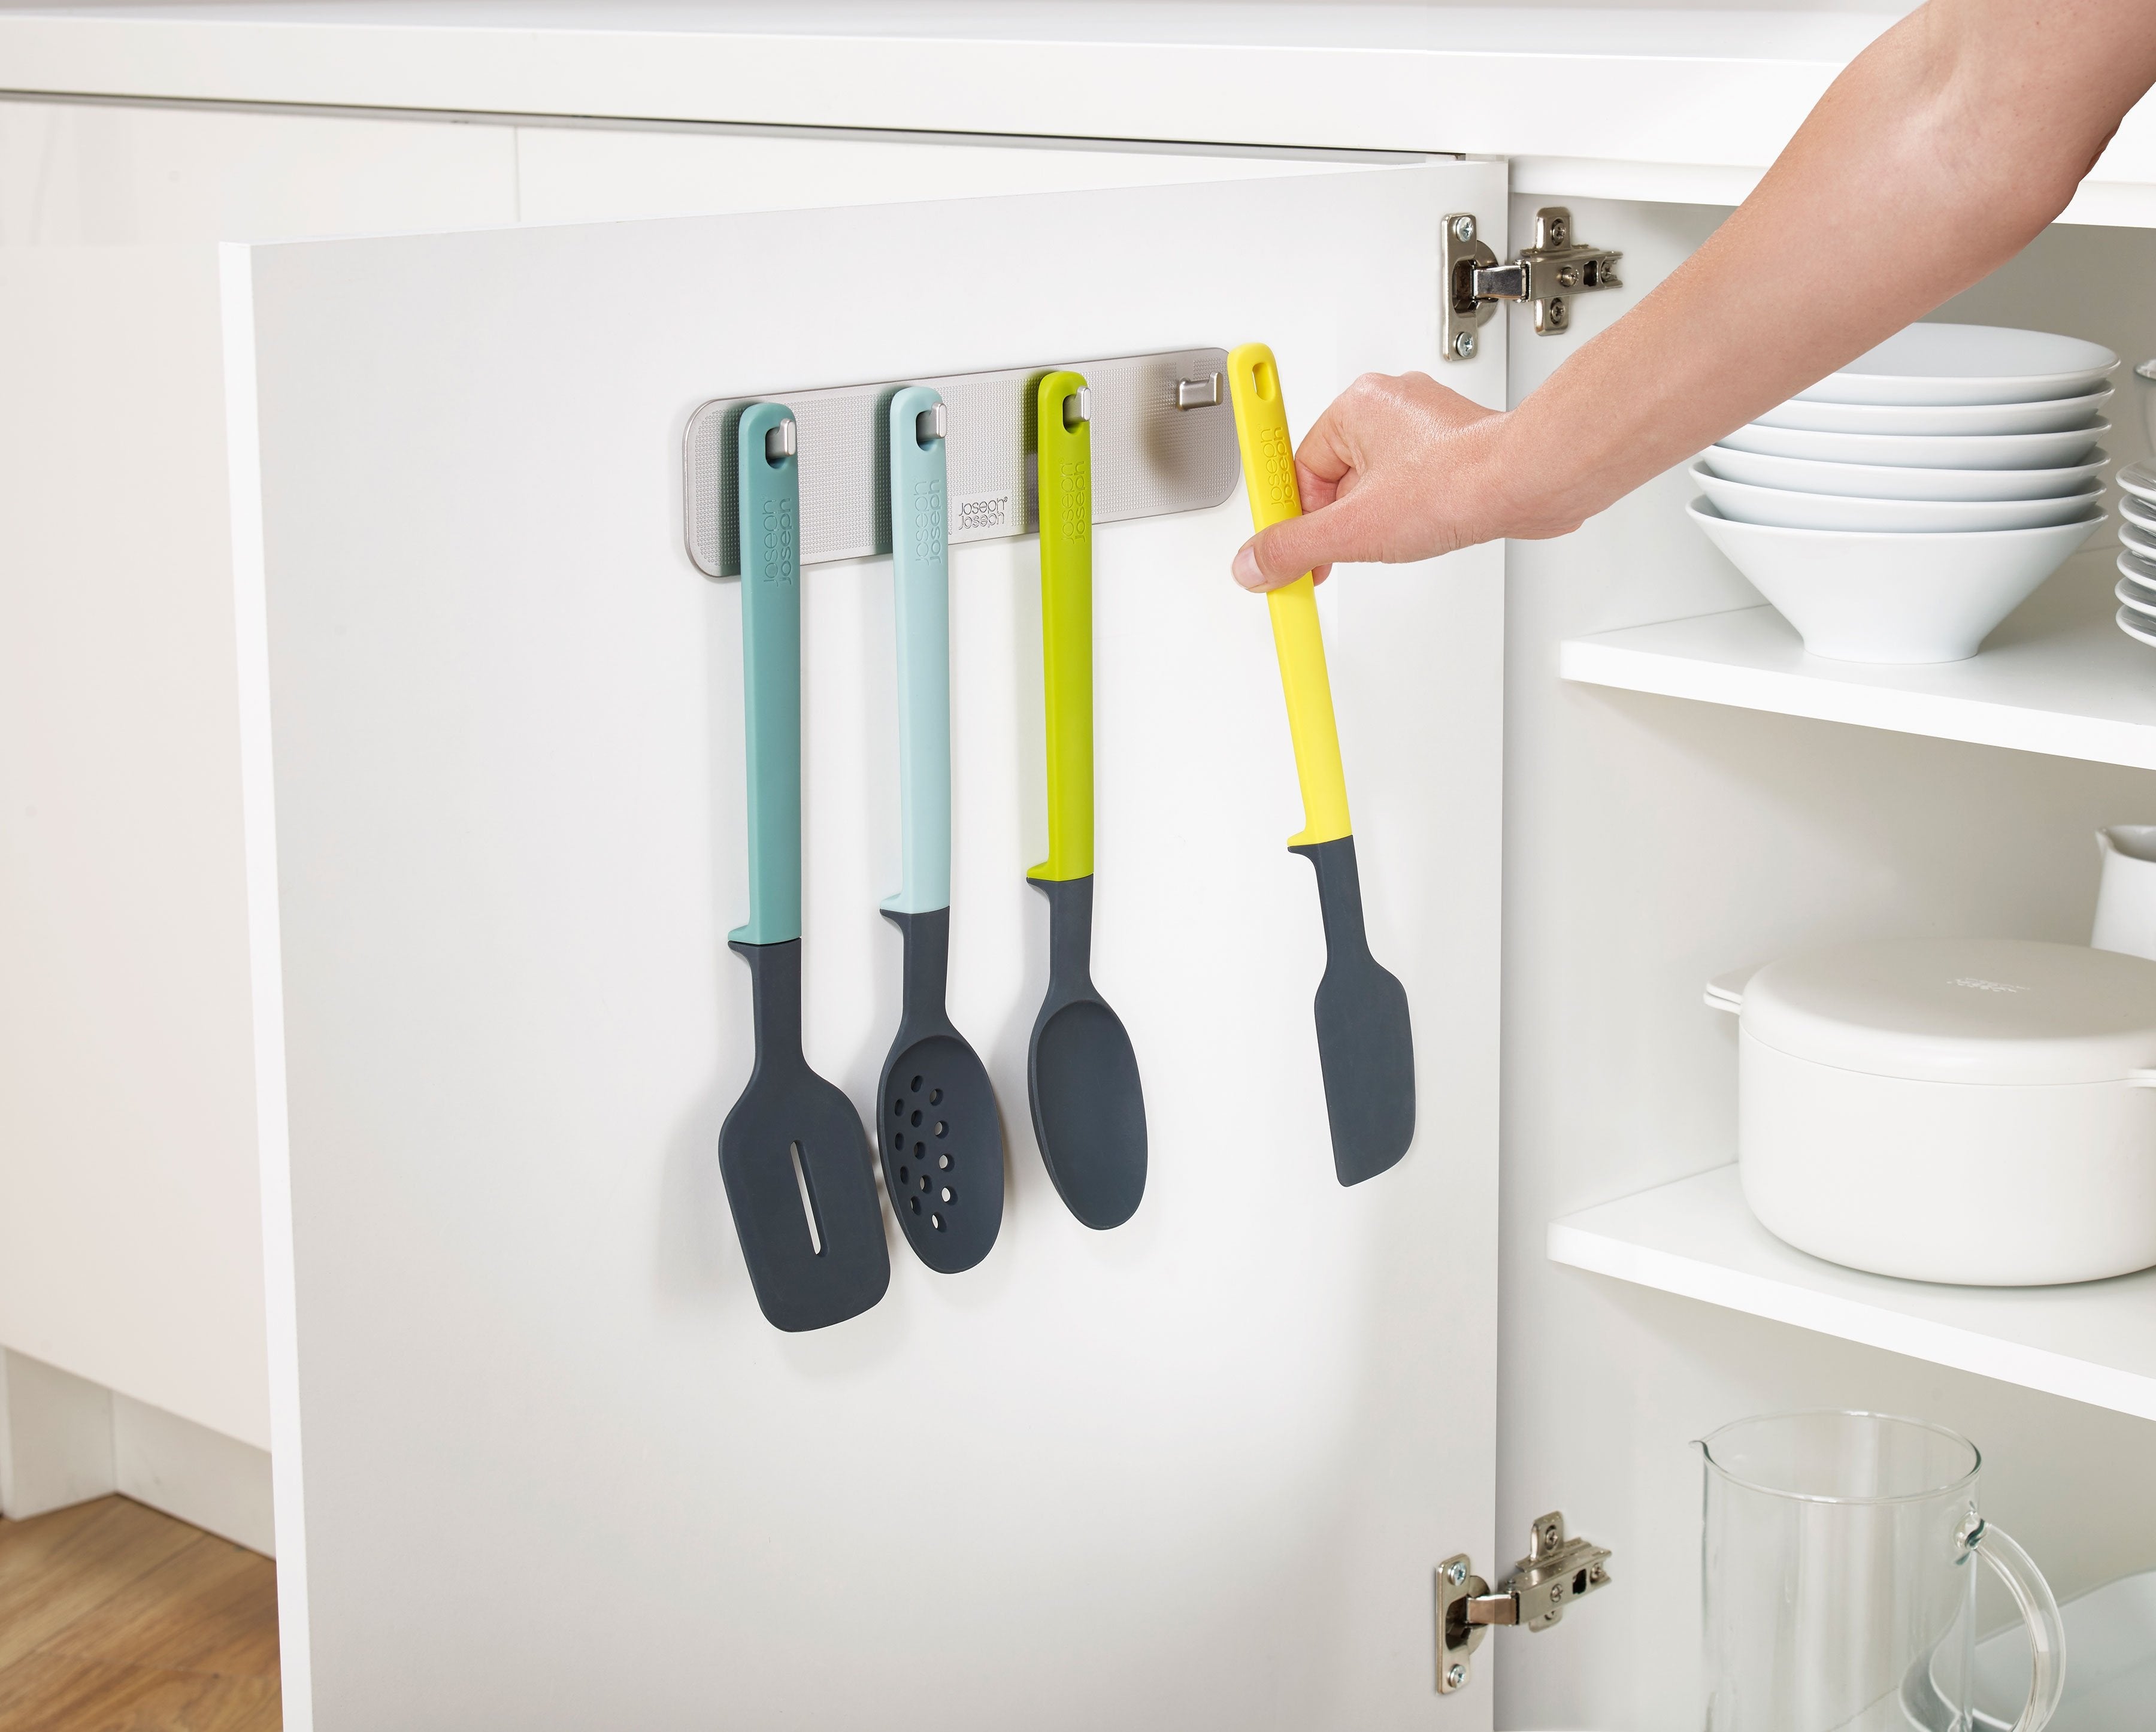 BEON.COM.AU  This clever 4-piece utensil set makes maximum use of the space inside your cupboard by storing on the back of the door.  Slimline rack ideal for mounting in narrow spaces Easy, tool-free installation using strong 3M™ VHB™ adhesive tape Elevate™ utensils feature integrated tool rests to prevent t... Joseph Joseph at BEON.COM.AU